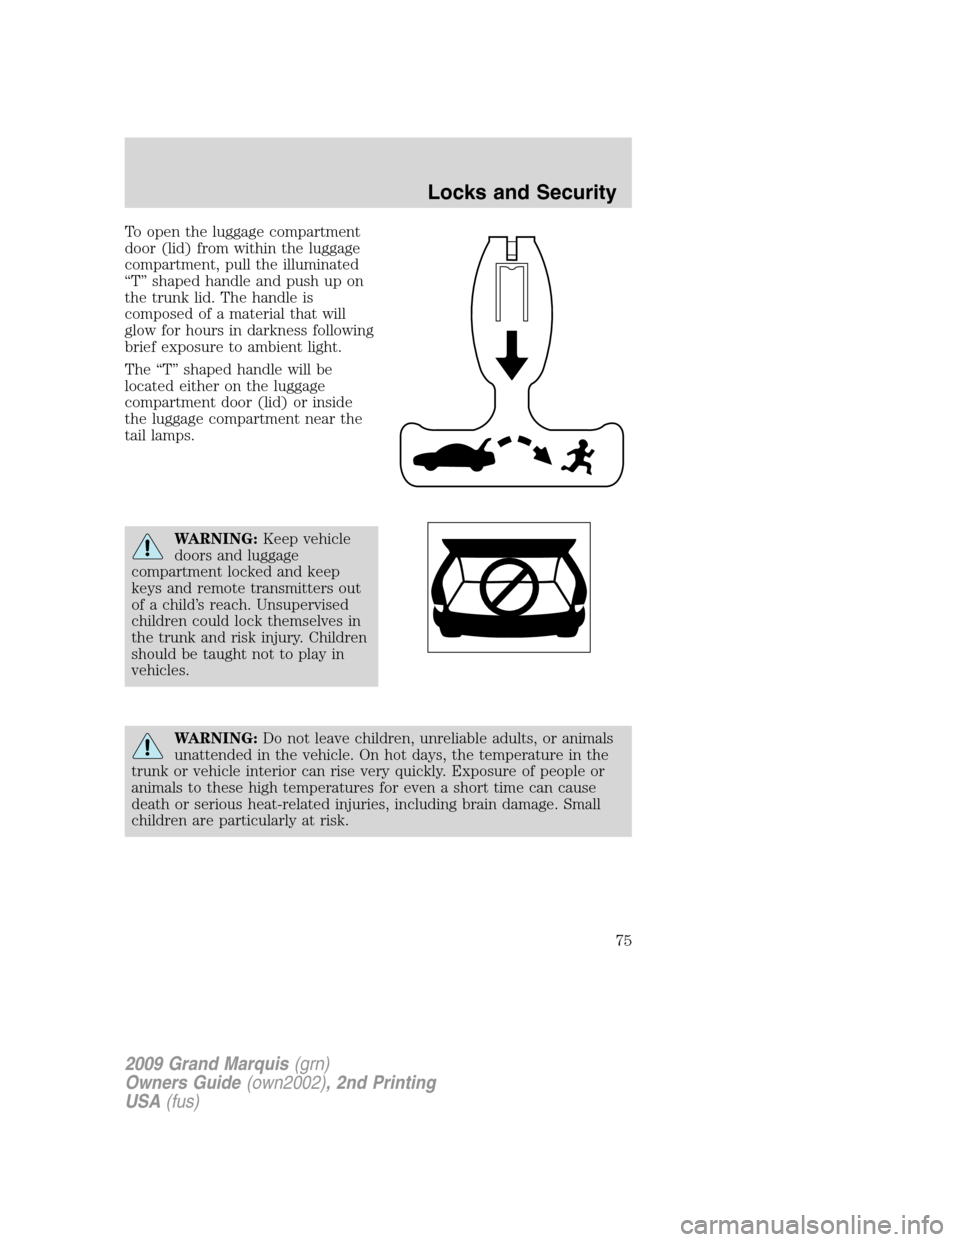 Mercury Grand Marquis 2009  s Manual PDF To open the luggage compartment
door (lid) from within the luggage
compartment, pull the illuminated
“T” shaped handle and push up on
the trunk lid. The handle is
composed of a material that will
